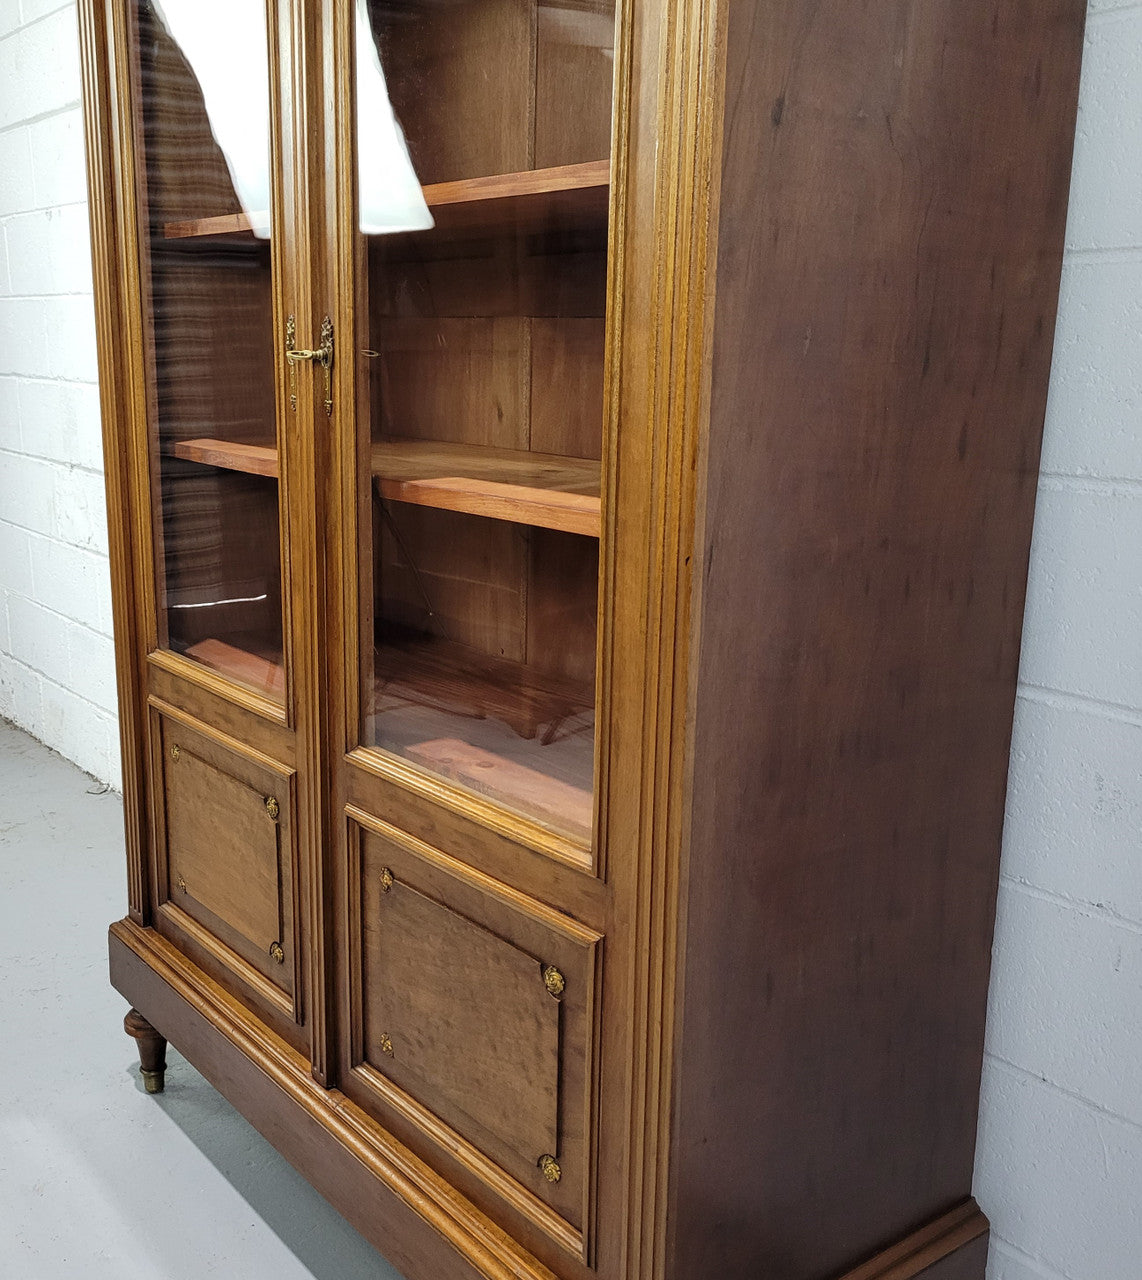 French Walnut two door bookcase with adjustable shelves and lovely ormolu details. It is in good original detailed condition.